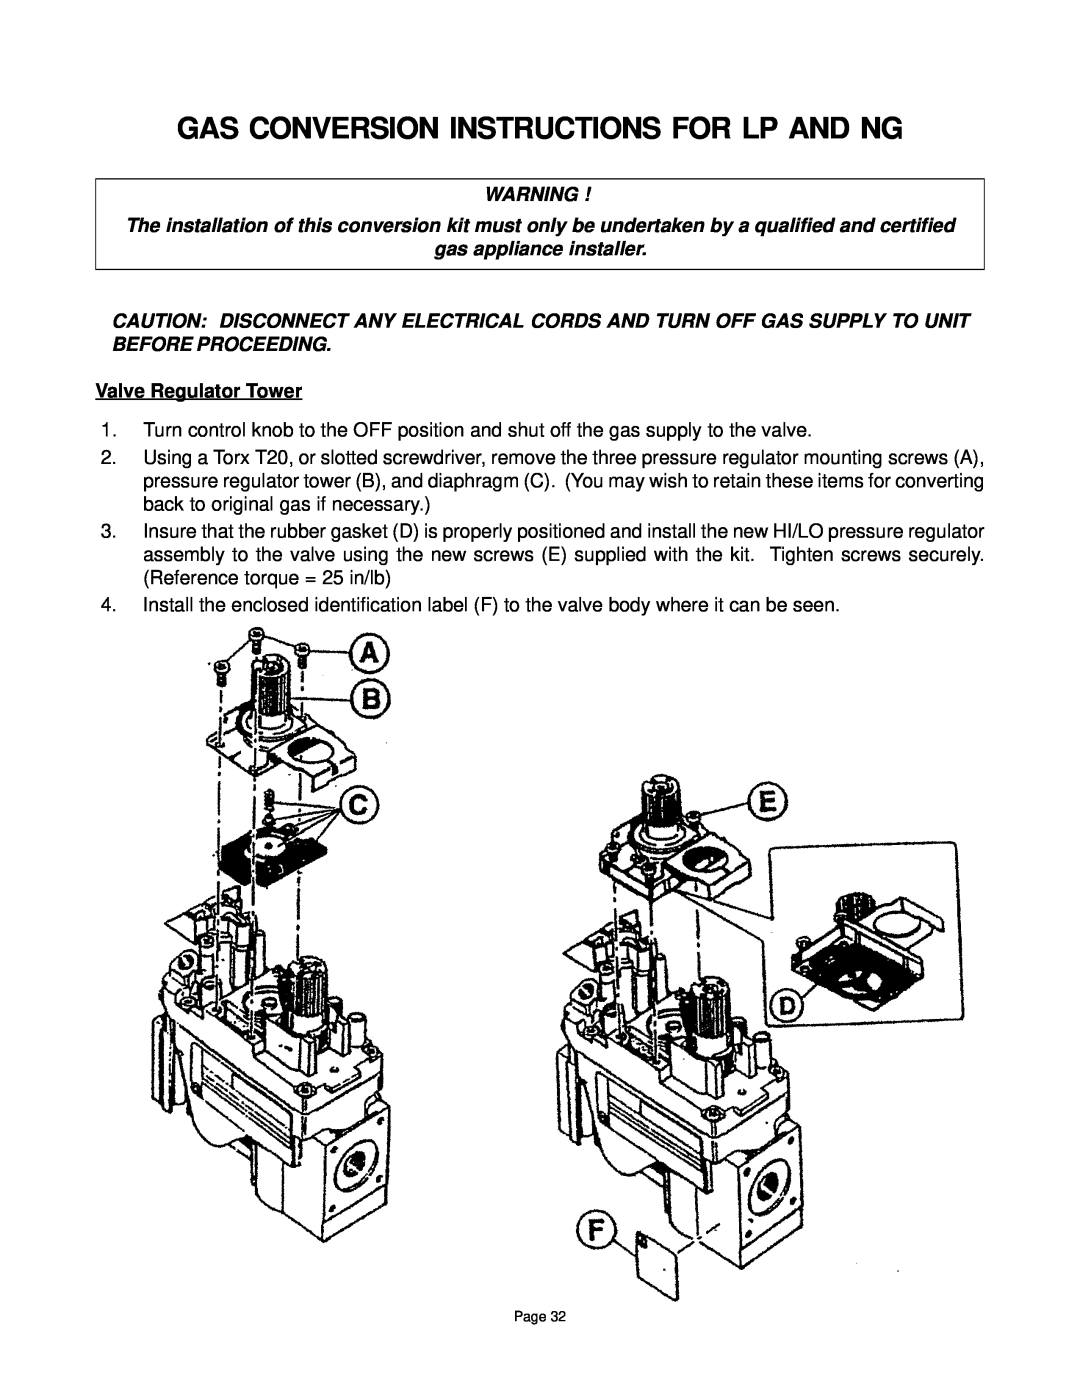 Quadra-Fire DV-40 manual gas appliance installer, Valve Regulator Tower, Gas Conversion Instructions For Lp And Ng 